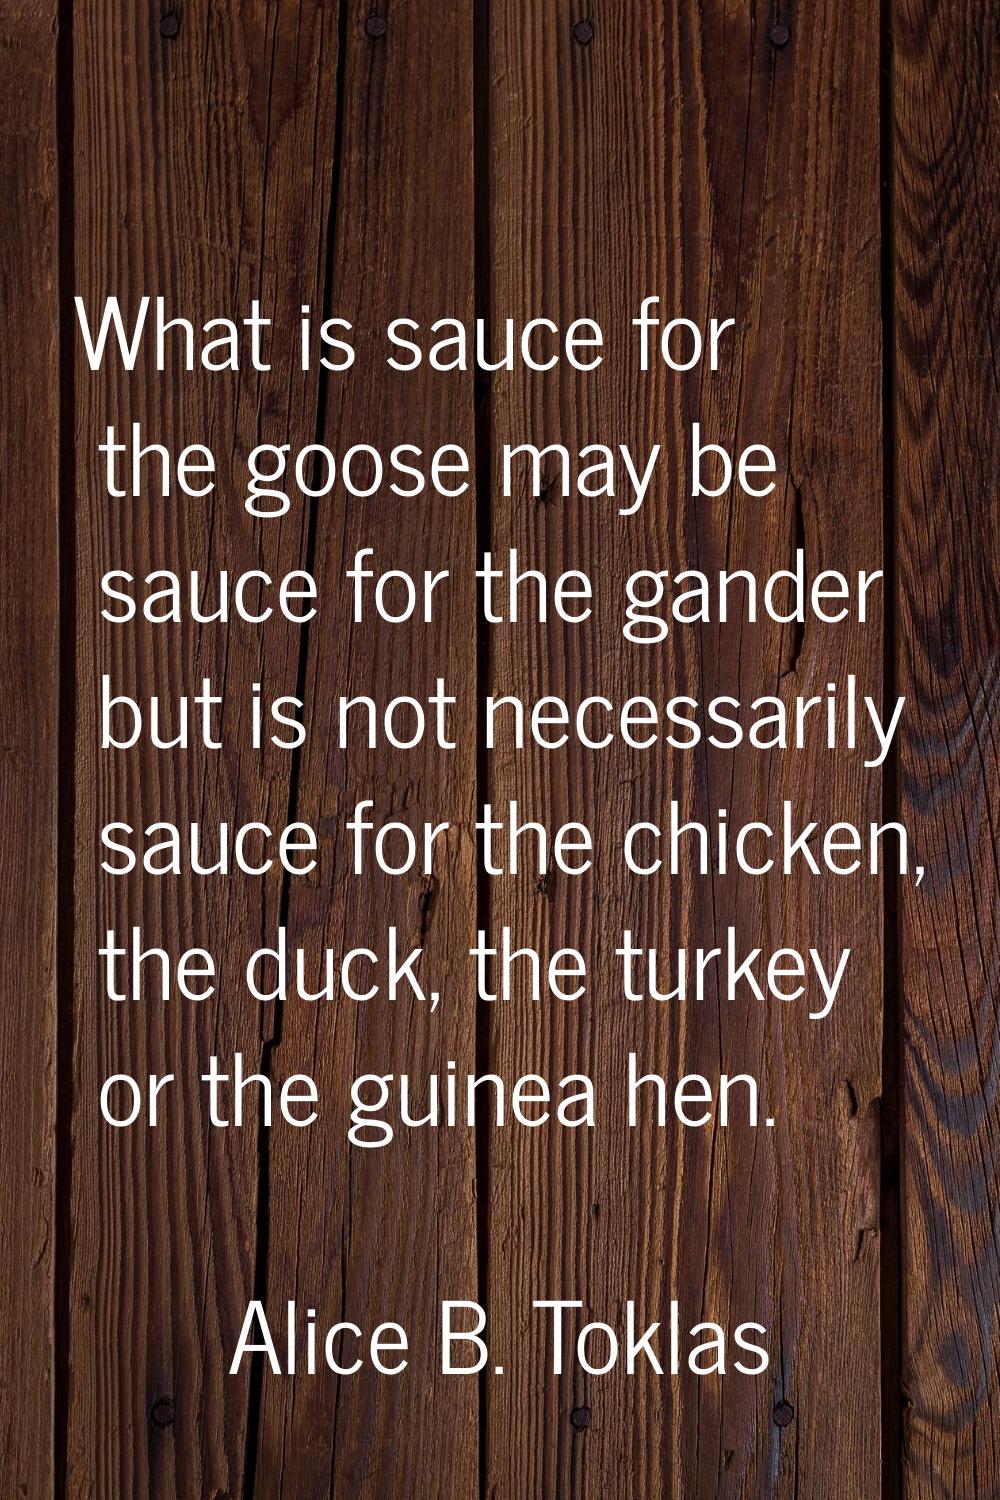 What is sauce for the goose may be sauce for the gander but is not necessarily sauce for the chicke